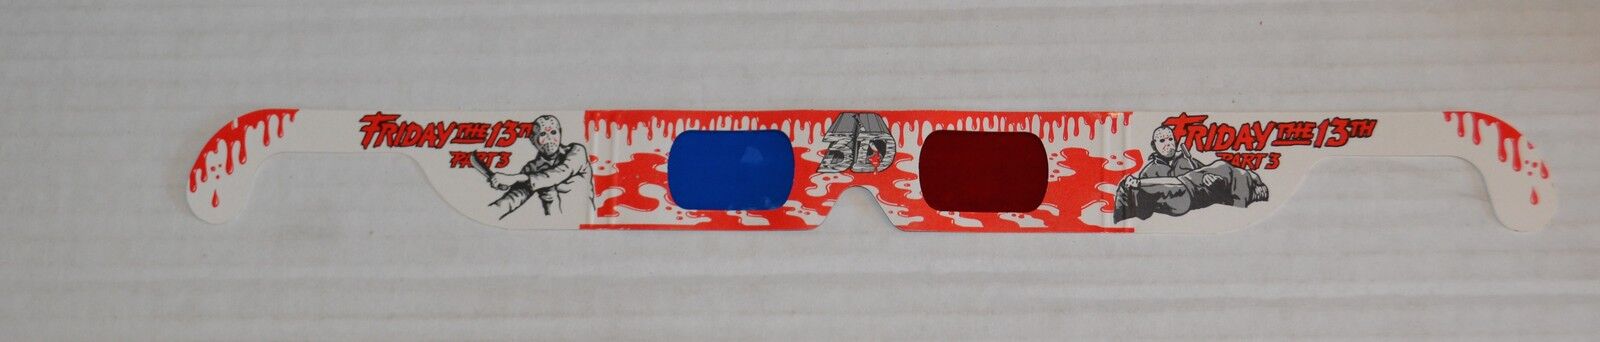 NEW FRIDAY THE 13th 3-D GLASSES FROM 1982 Part 3